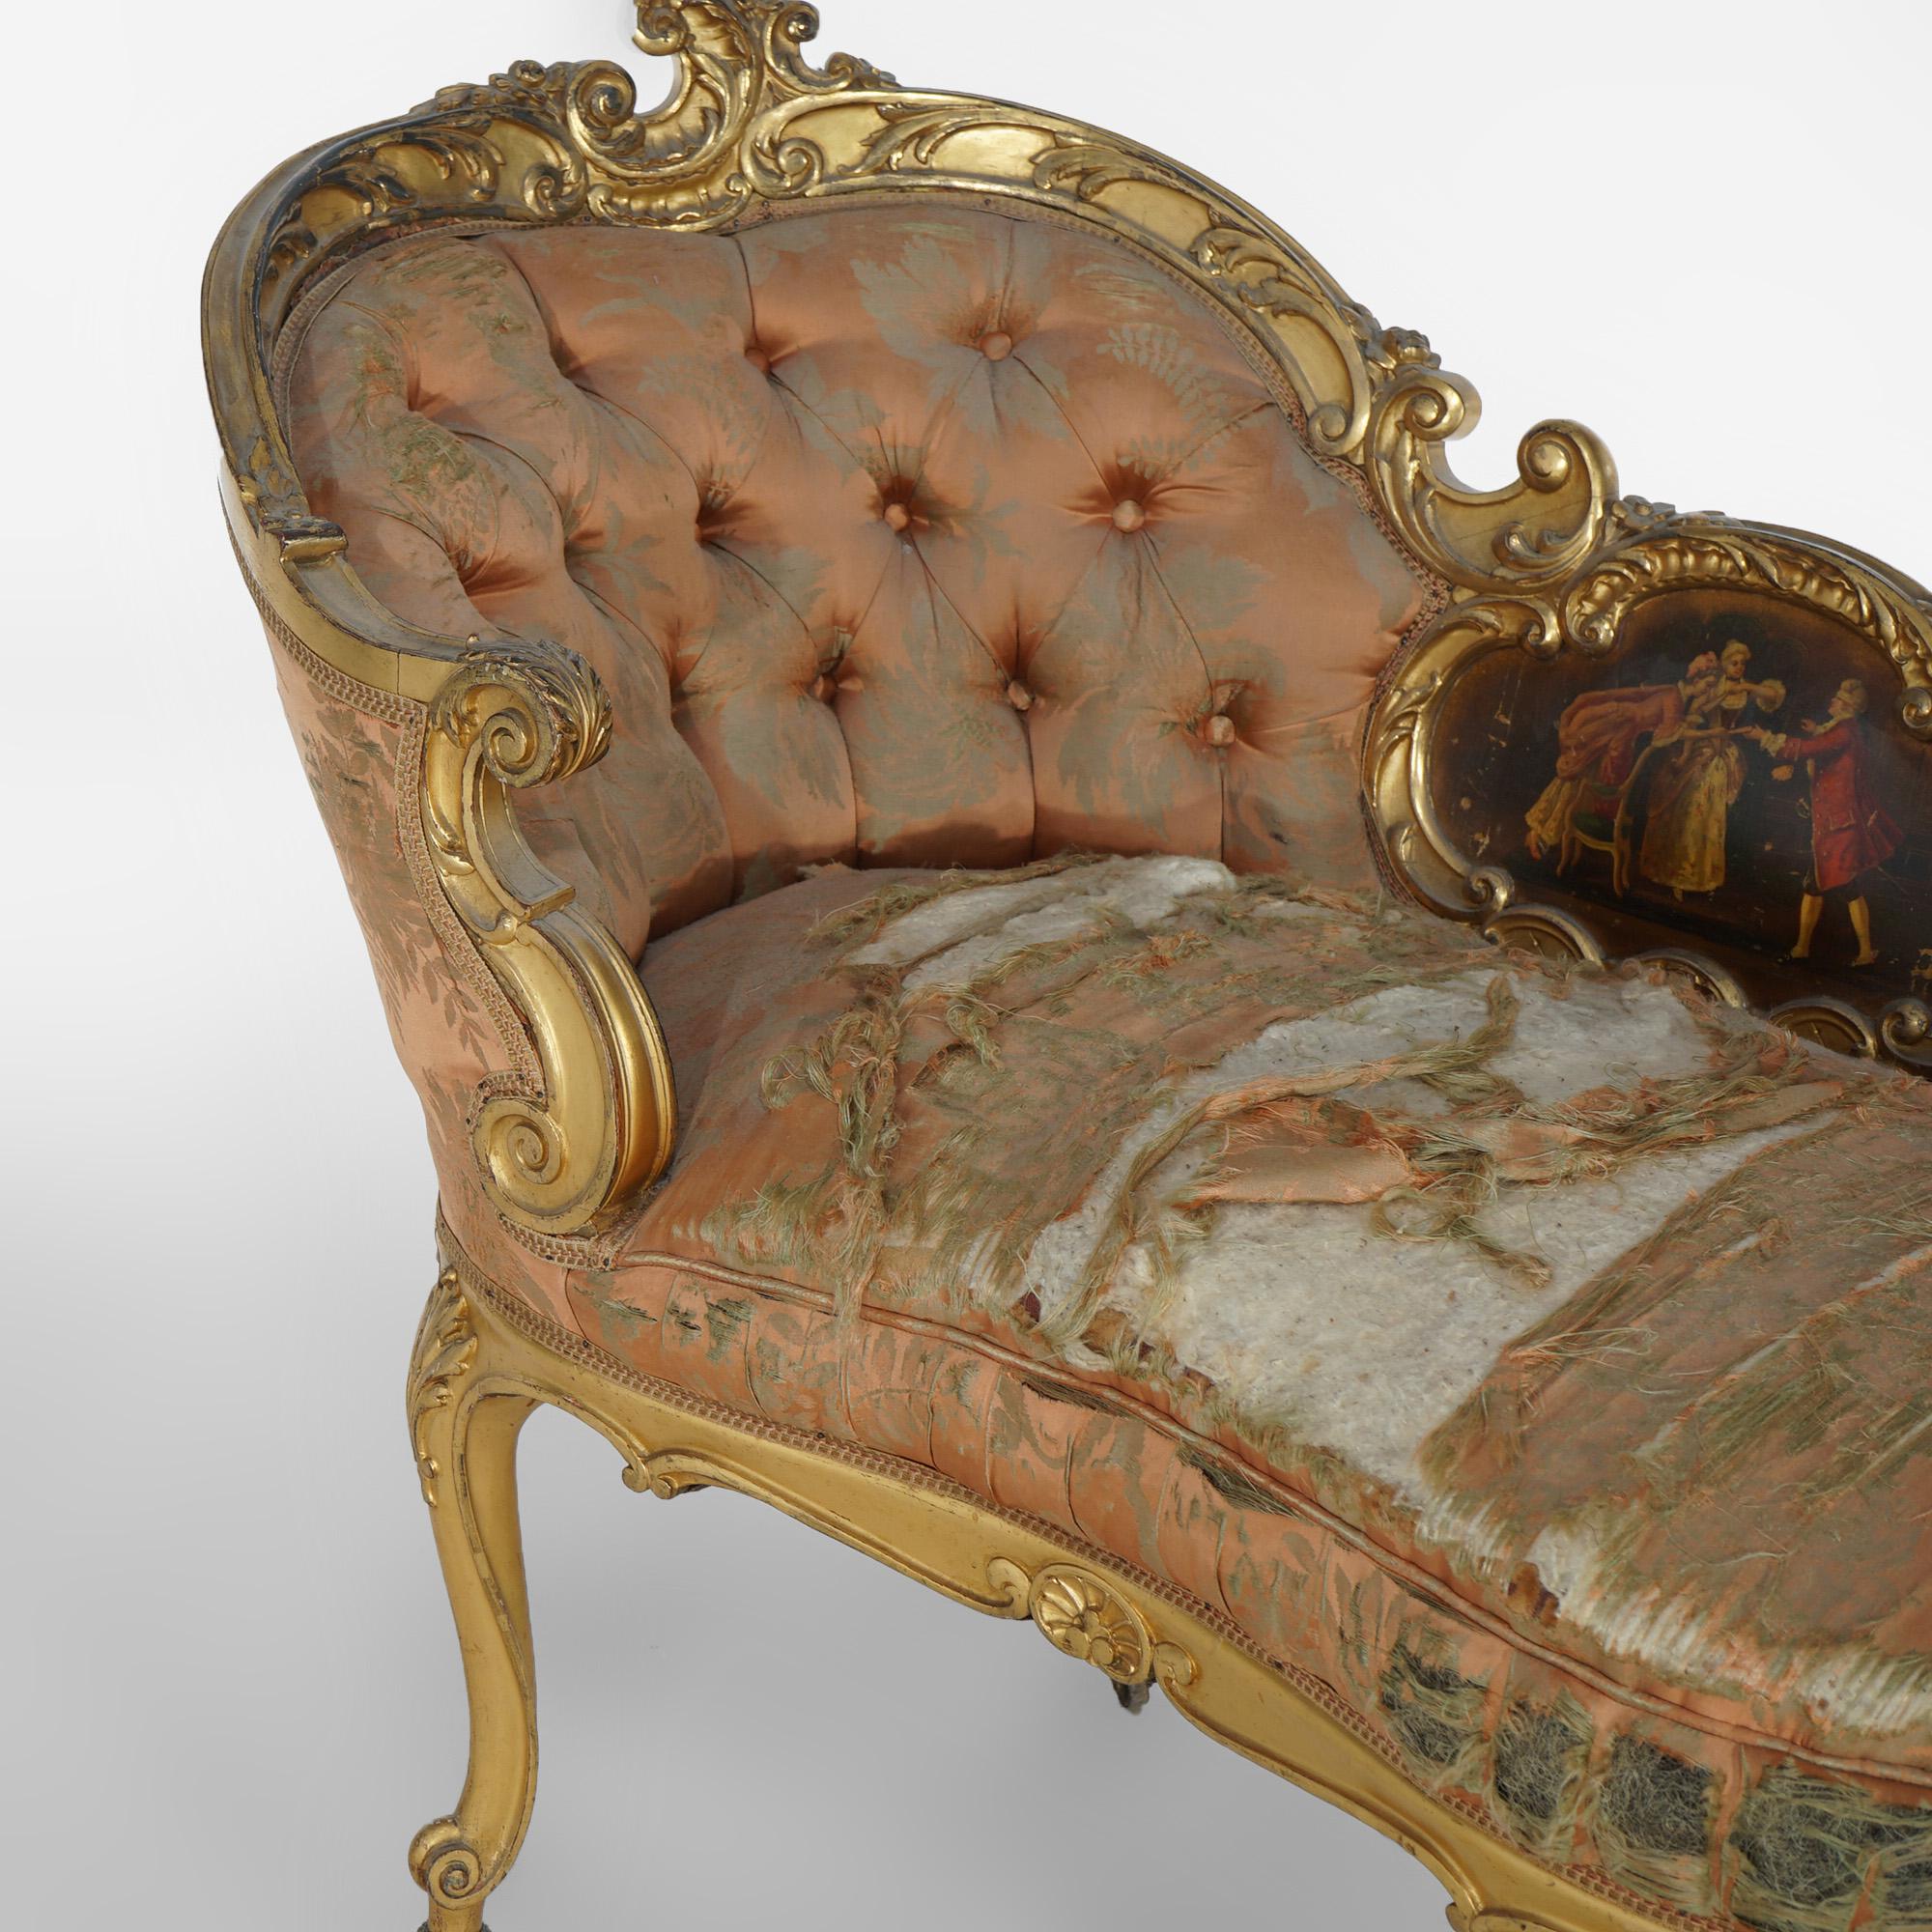 Early Antique French Rococo Vernis Martin & Giltwood Half-Recamier Settee 19th C For Sale 14